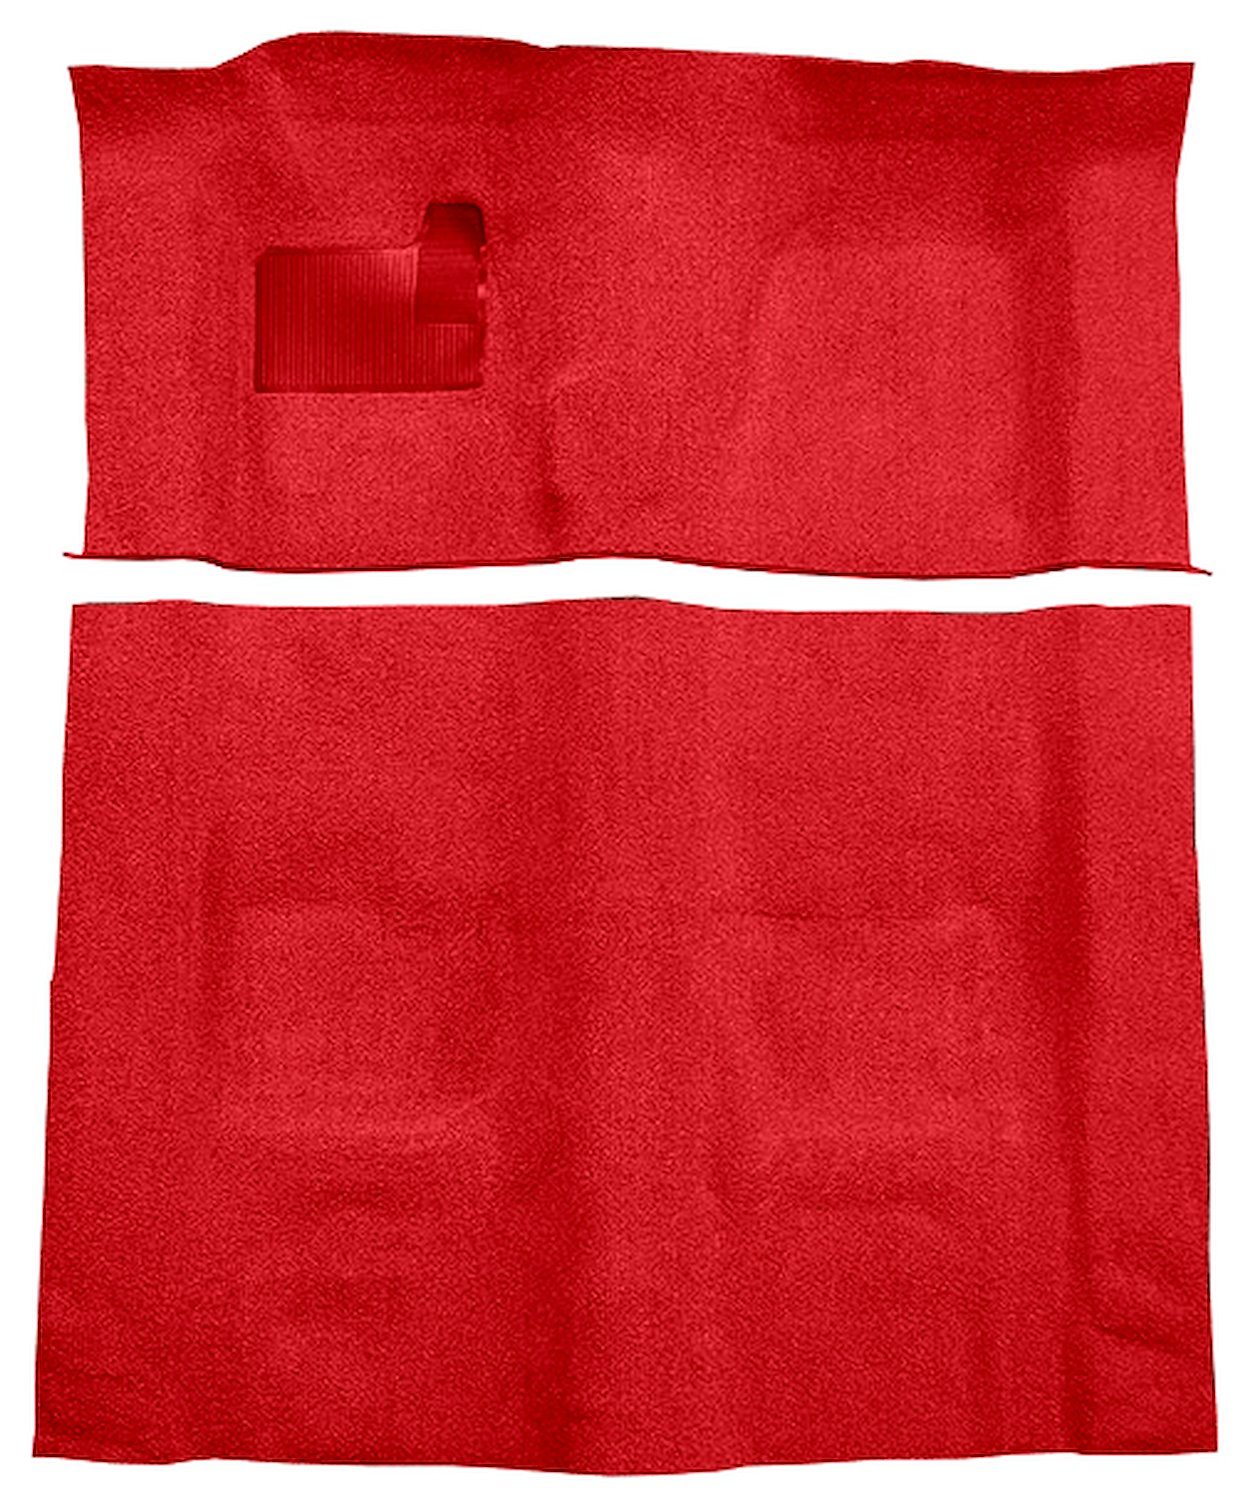 Molded Cut Pile Carpet for 1974-1975 Chevrolet Camaro, Pontiac Firebird [Mass Backing, 4-Speed Transmission, Flame Red]